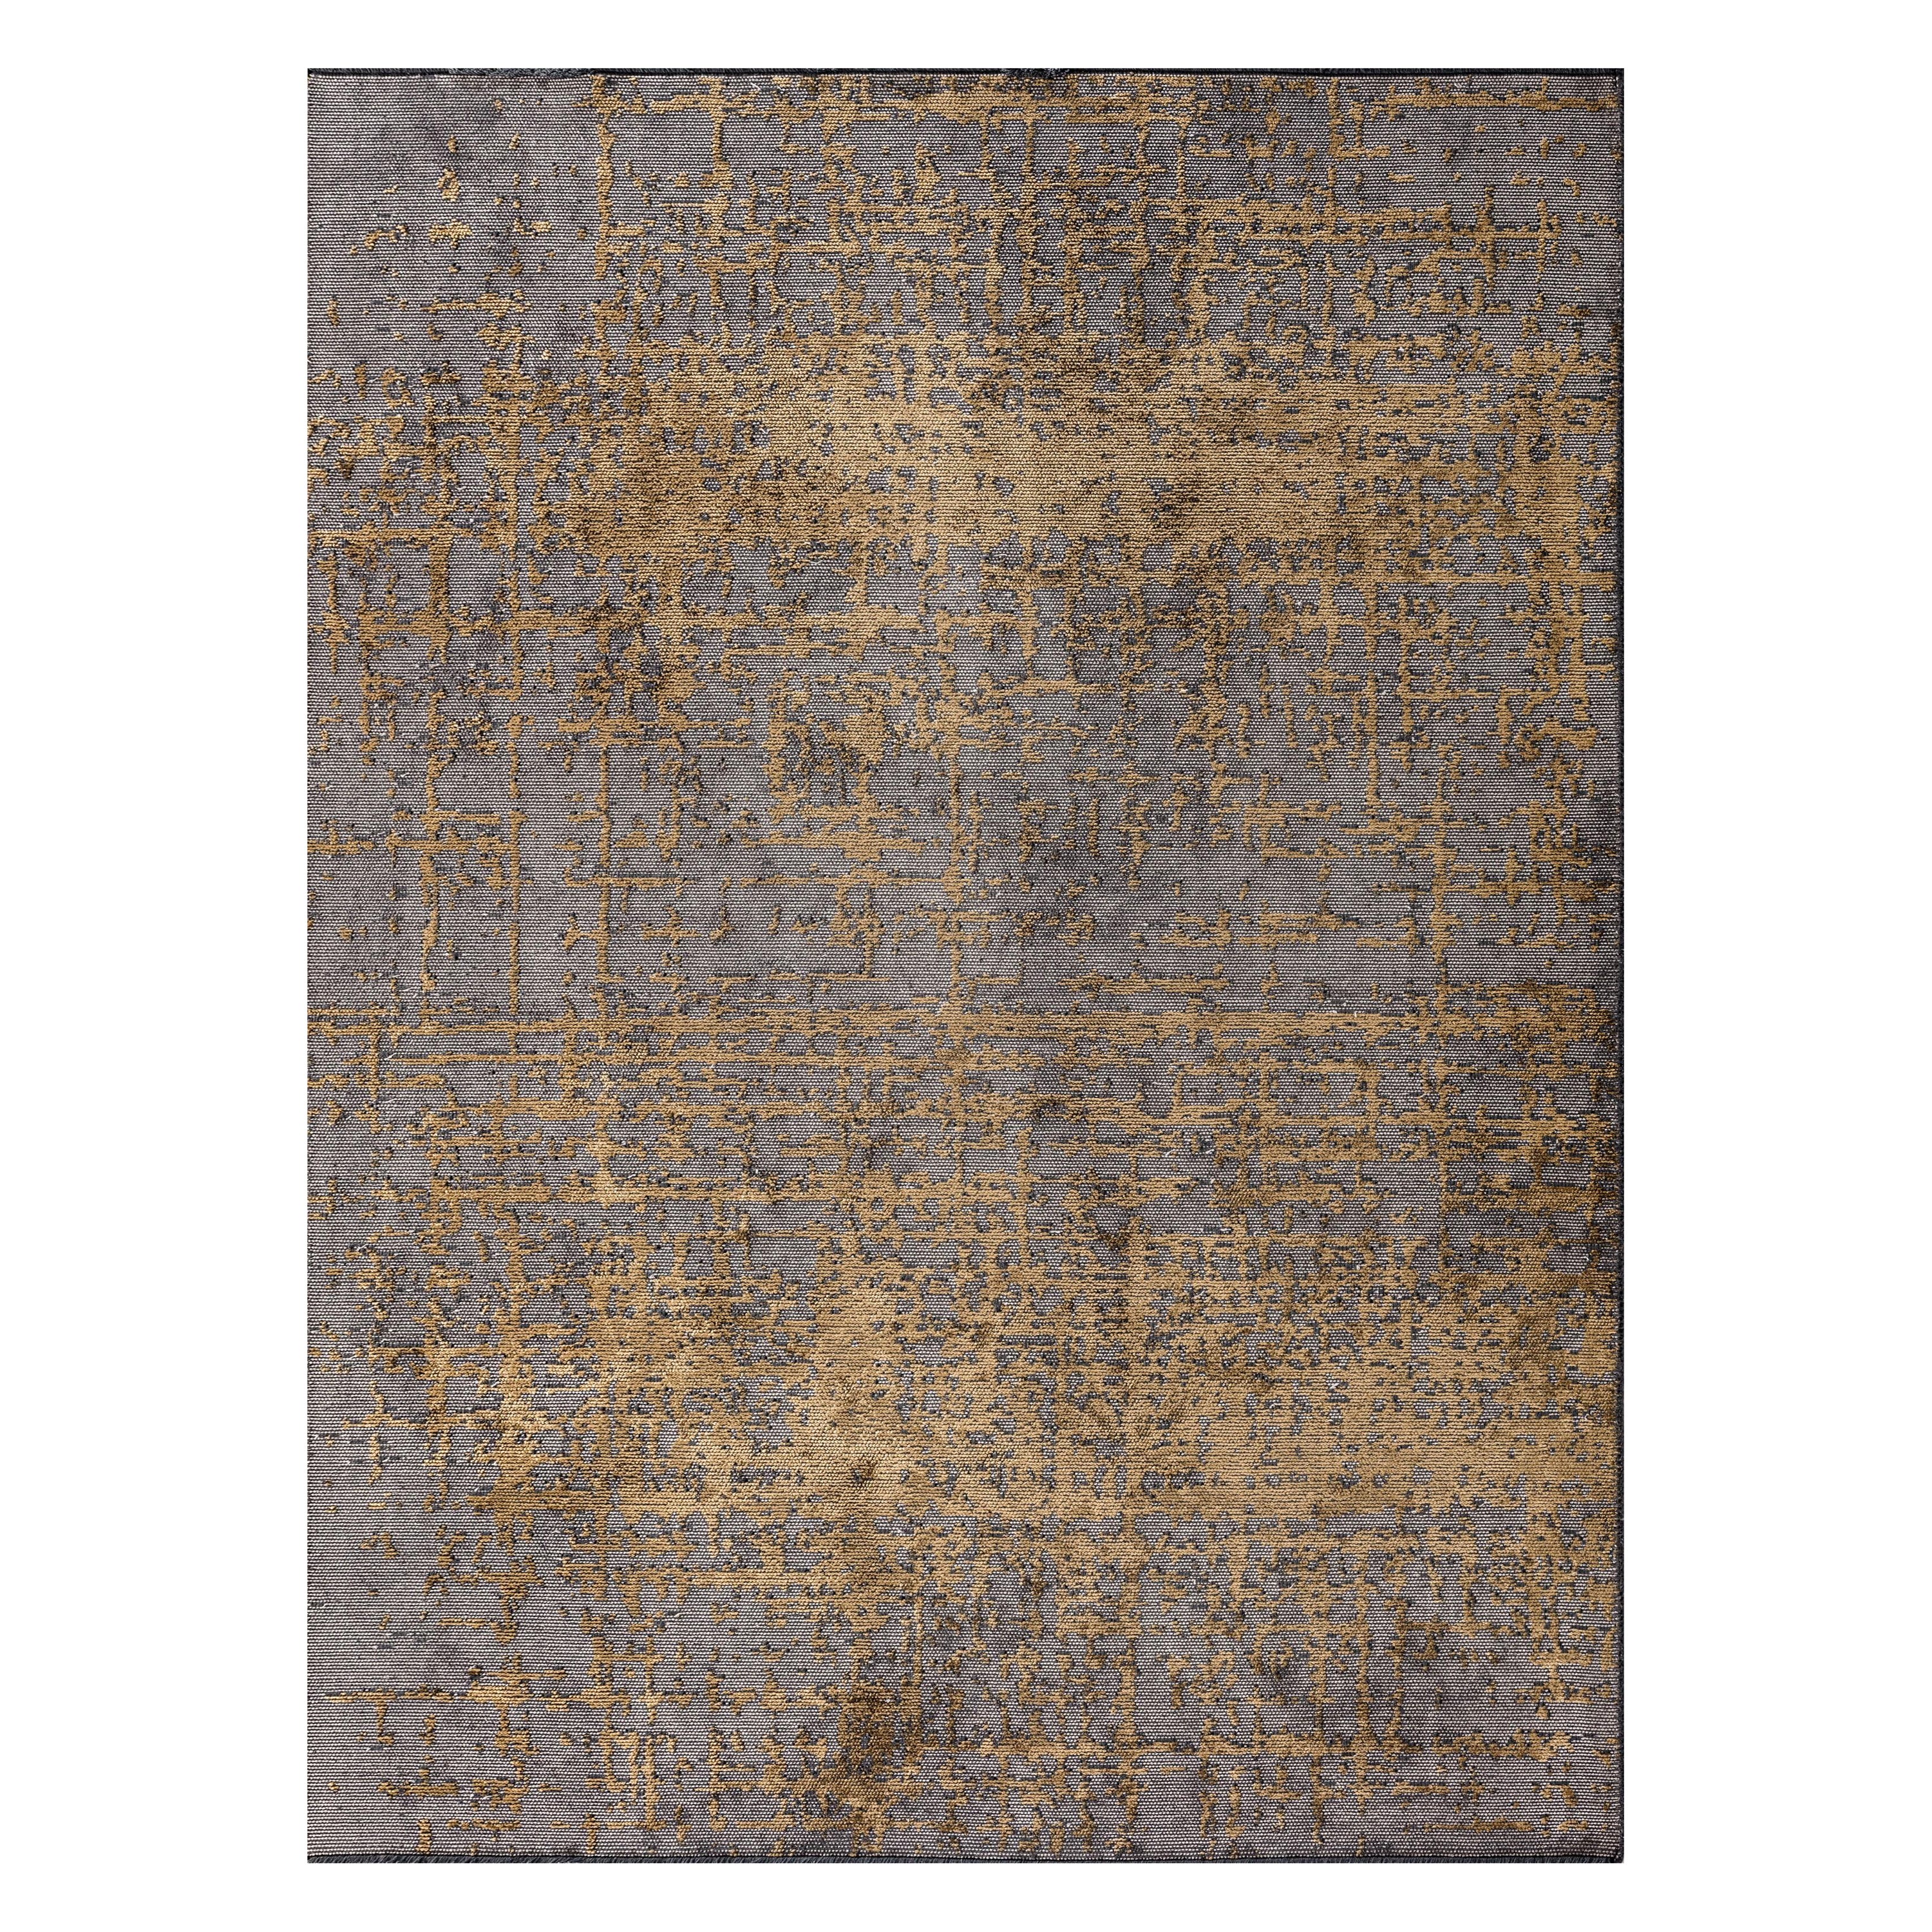 For Sale:  (Brown) Modern Abstract Luxury Hand-Finished Area Rug